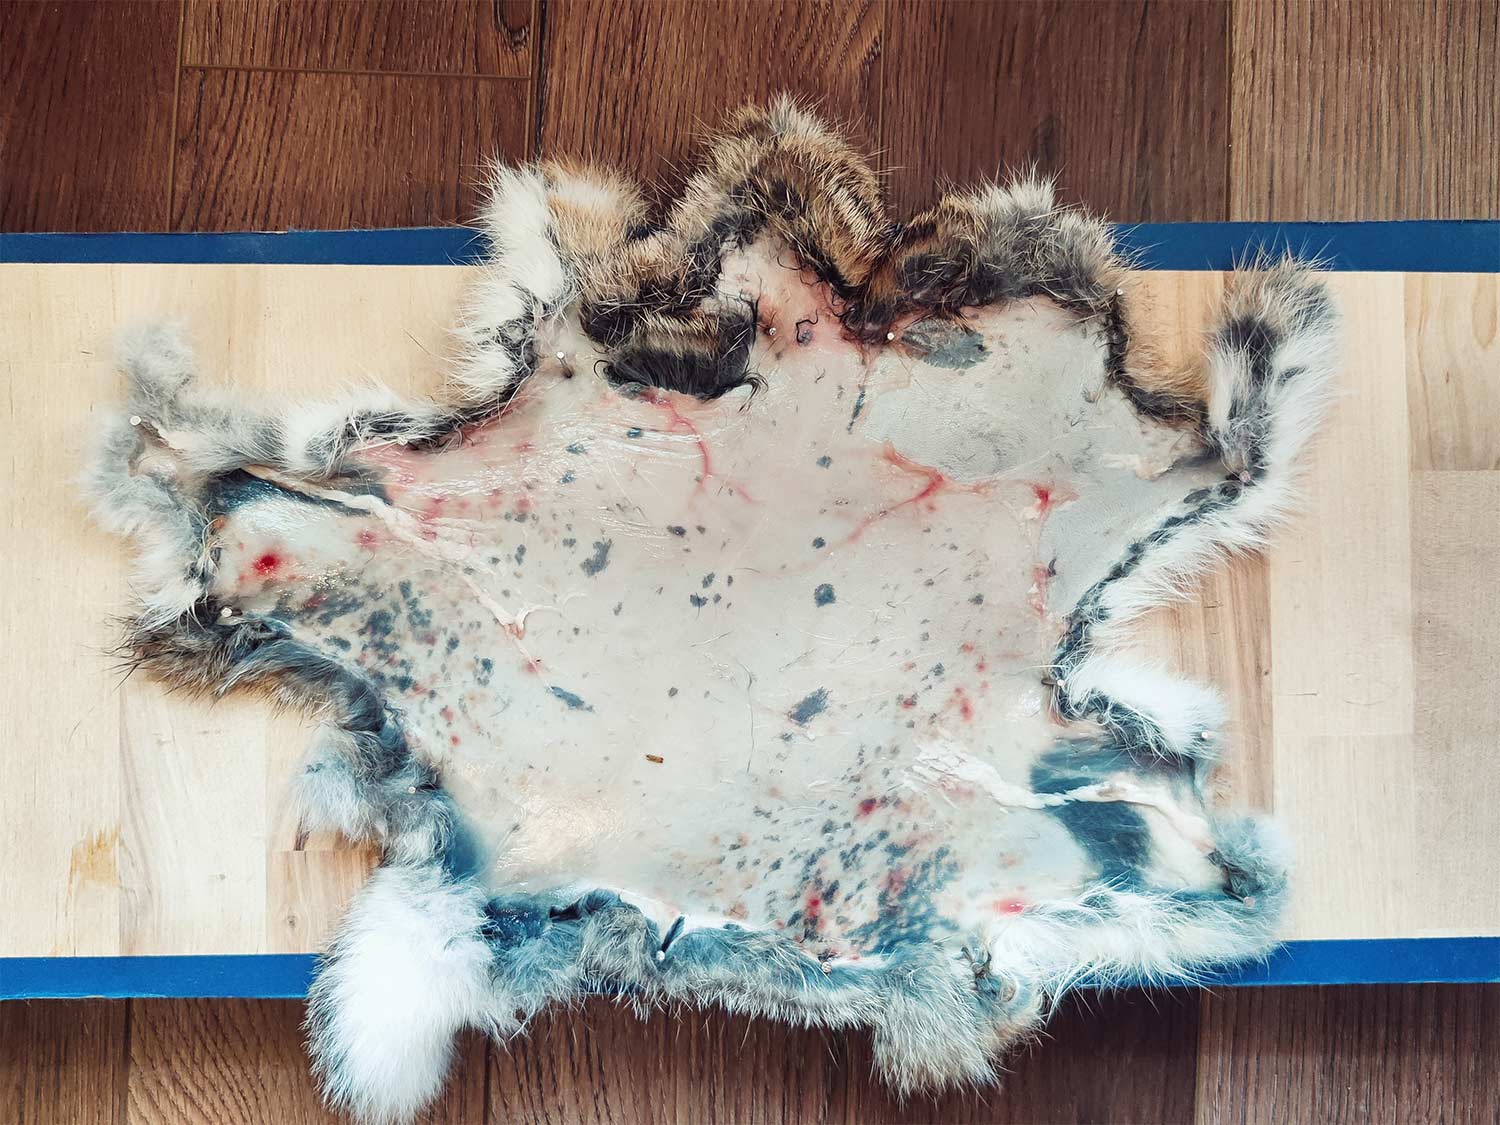 A stretched out rabbit hide pinned to a board.